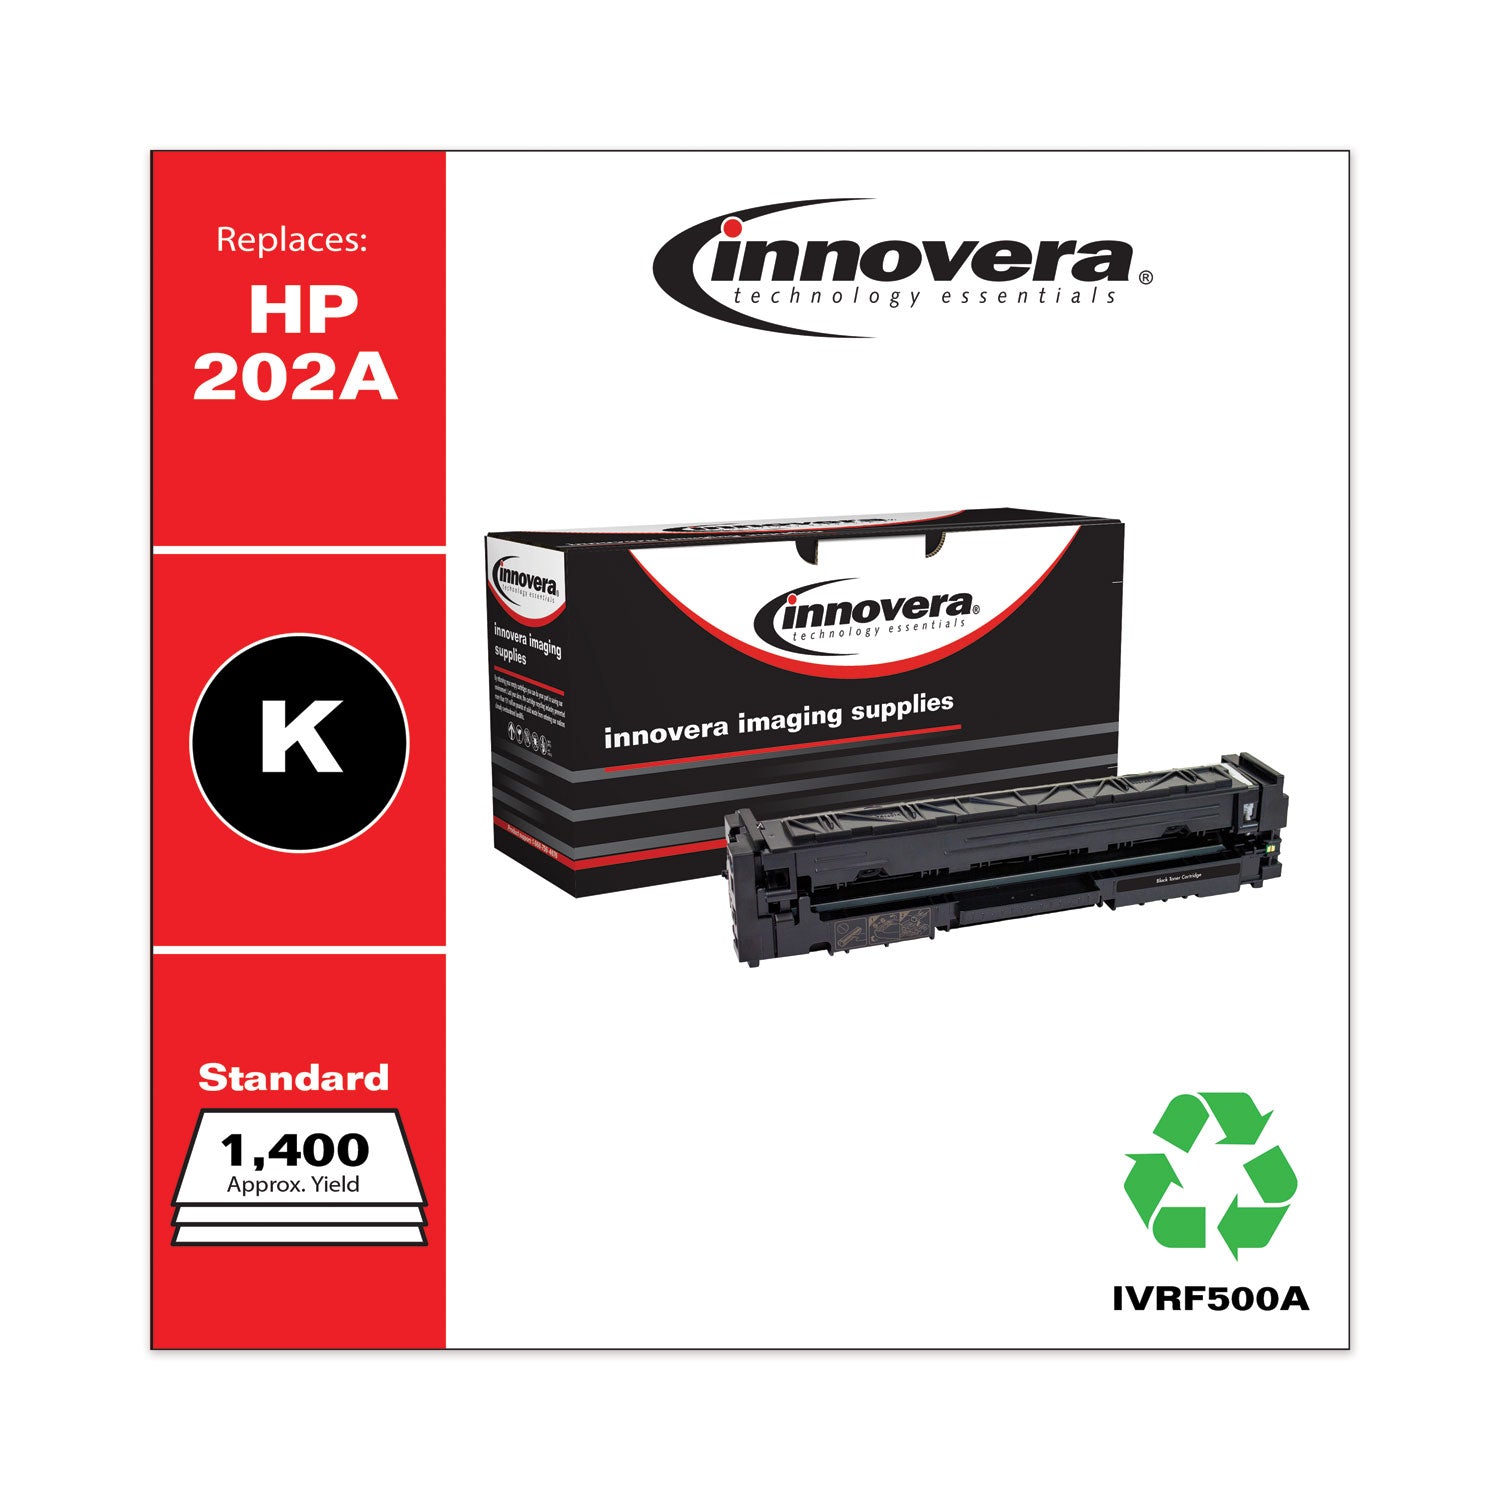 remanufactured-black-toner-replacement-for-202a-cf500a-1400-page-yield_ivrf500a - 2